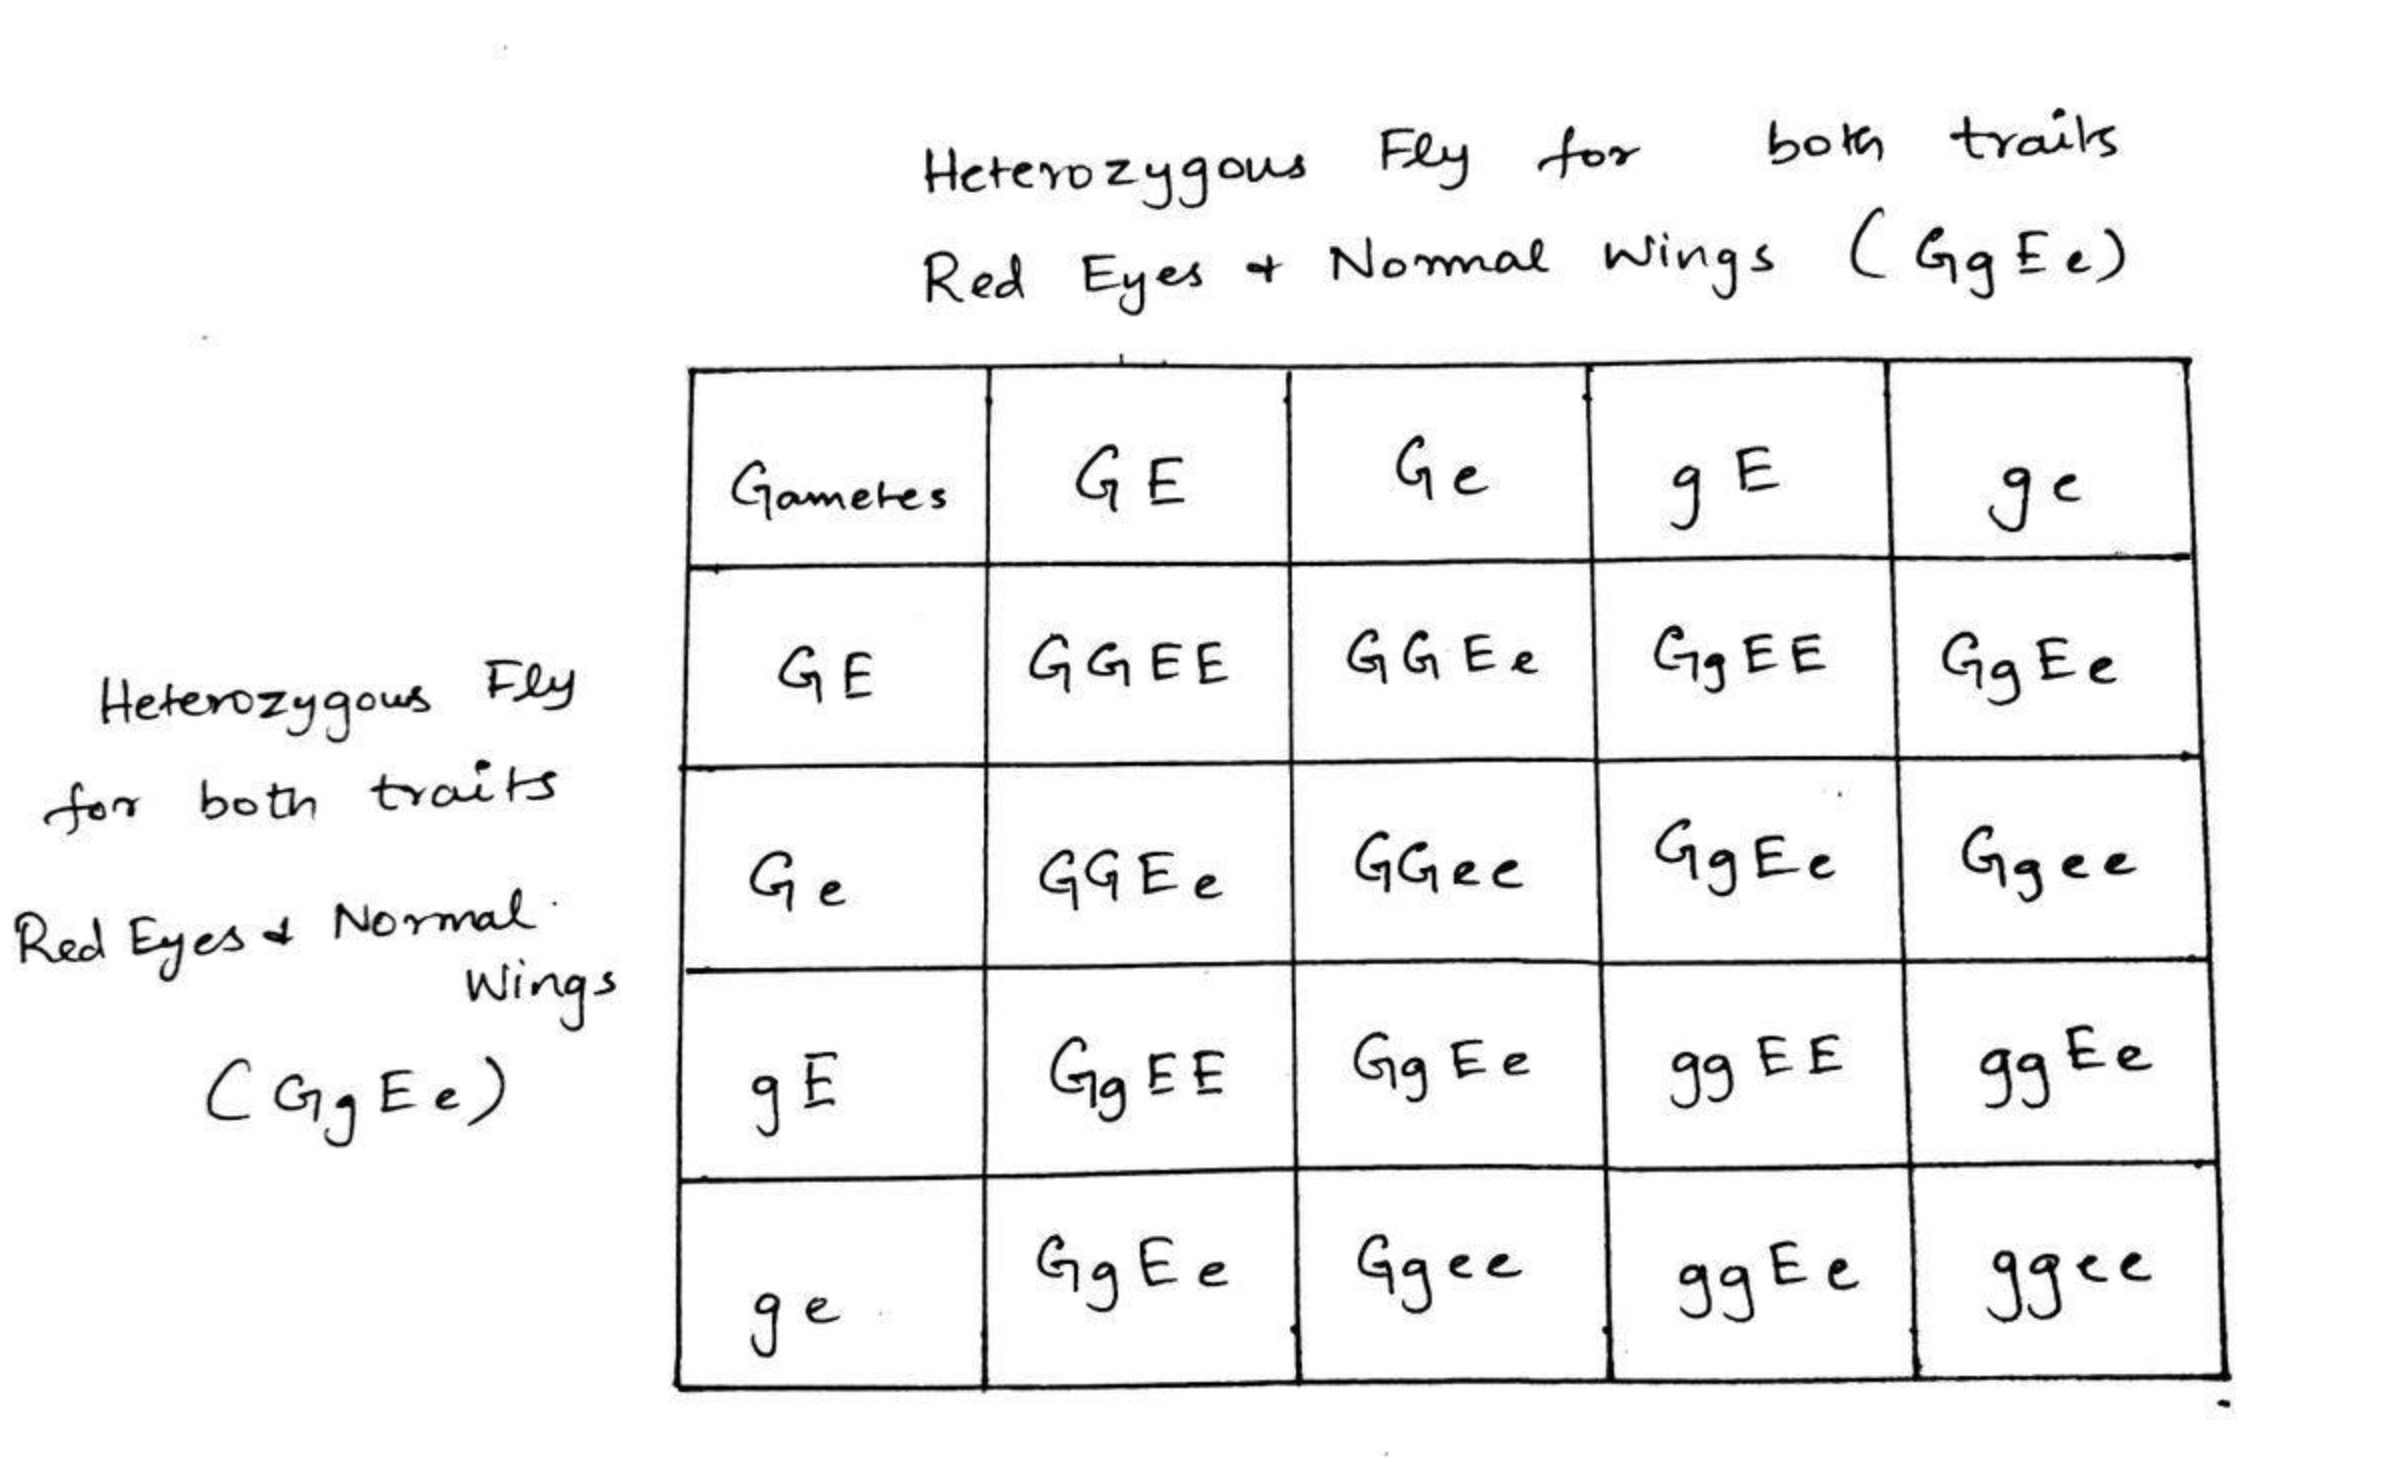 <p>Punnet Square shown in image</p><p>Phenotype ratios = 9:3:3:1</p><p>9 Red eyes, normal wings (GGEE, GgEE, GGEe, GgEe)</p><p>3 Brown eyes, normal wings (ggEe, ggEE)</p><p>3 Red eyes, vestigial wings (GGee, Ggee)</p><p>1 Brown eyes, vestigial wings (ggee)</p>